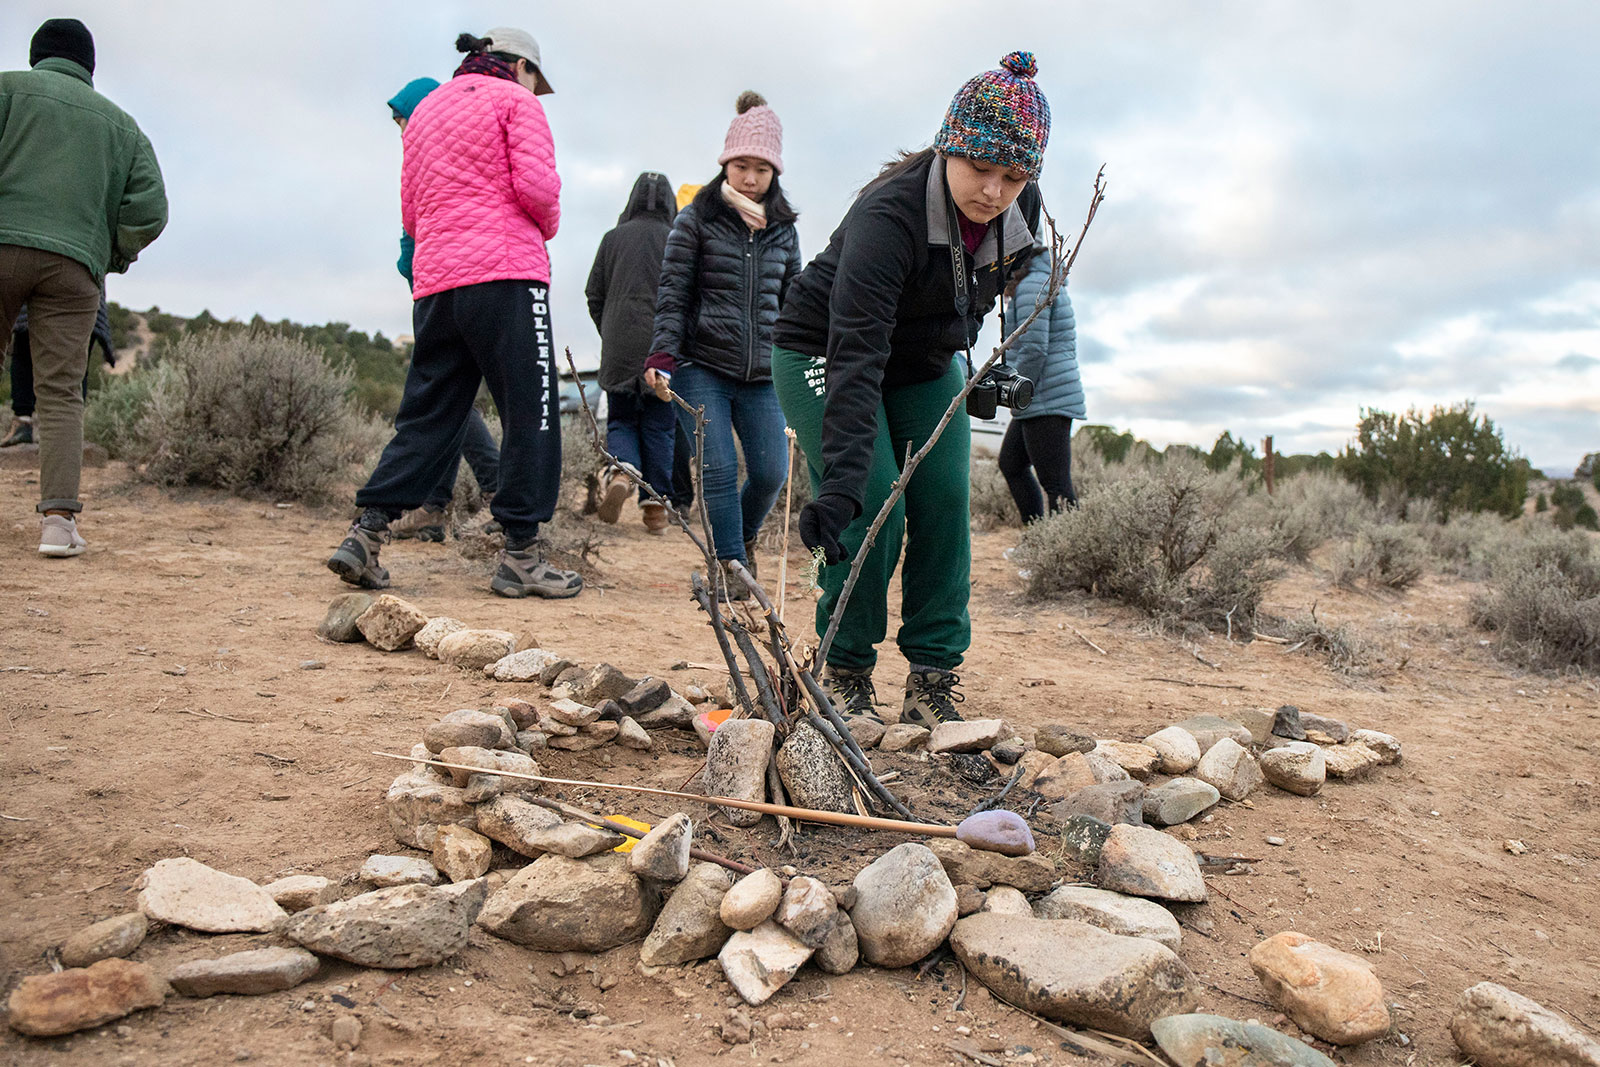 After a sunrise meditation along the Rio Grande Gorge, <strong>Emily Hidalgo ’22</strong> places a twig onto a ceremonial site where fires are lit to indicate the four directions and elements.